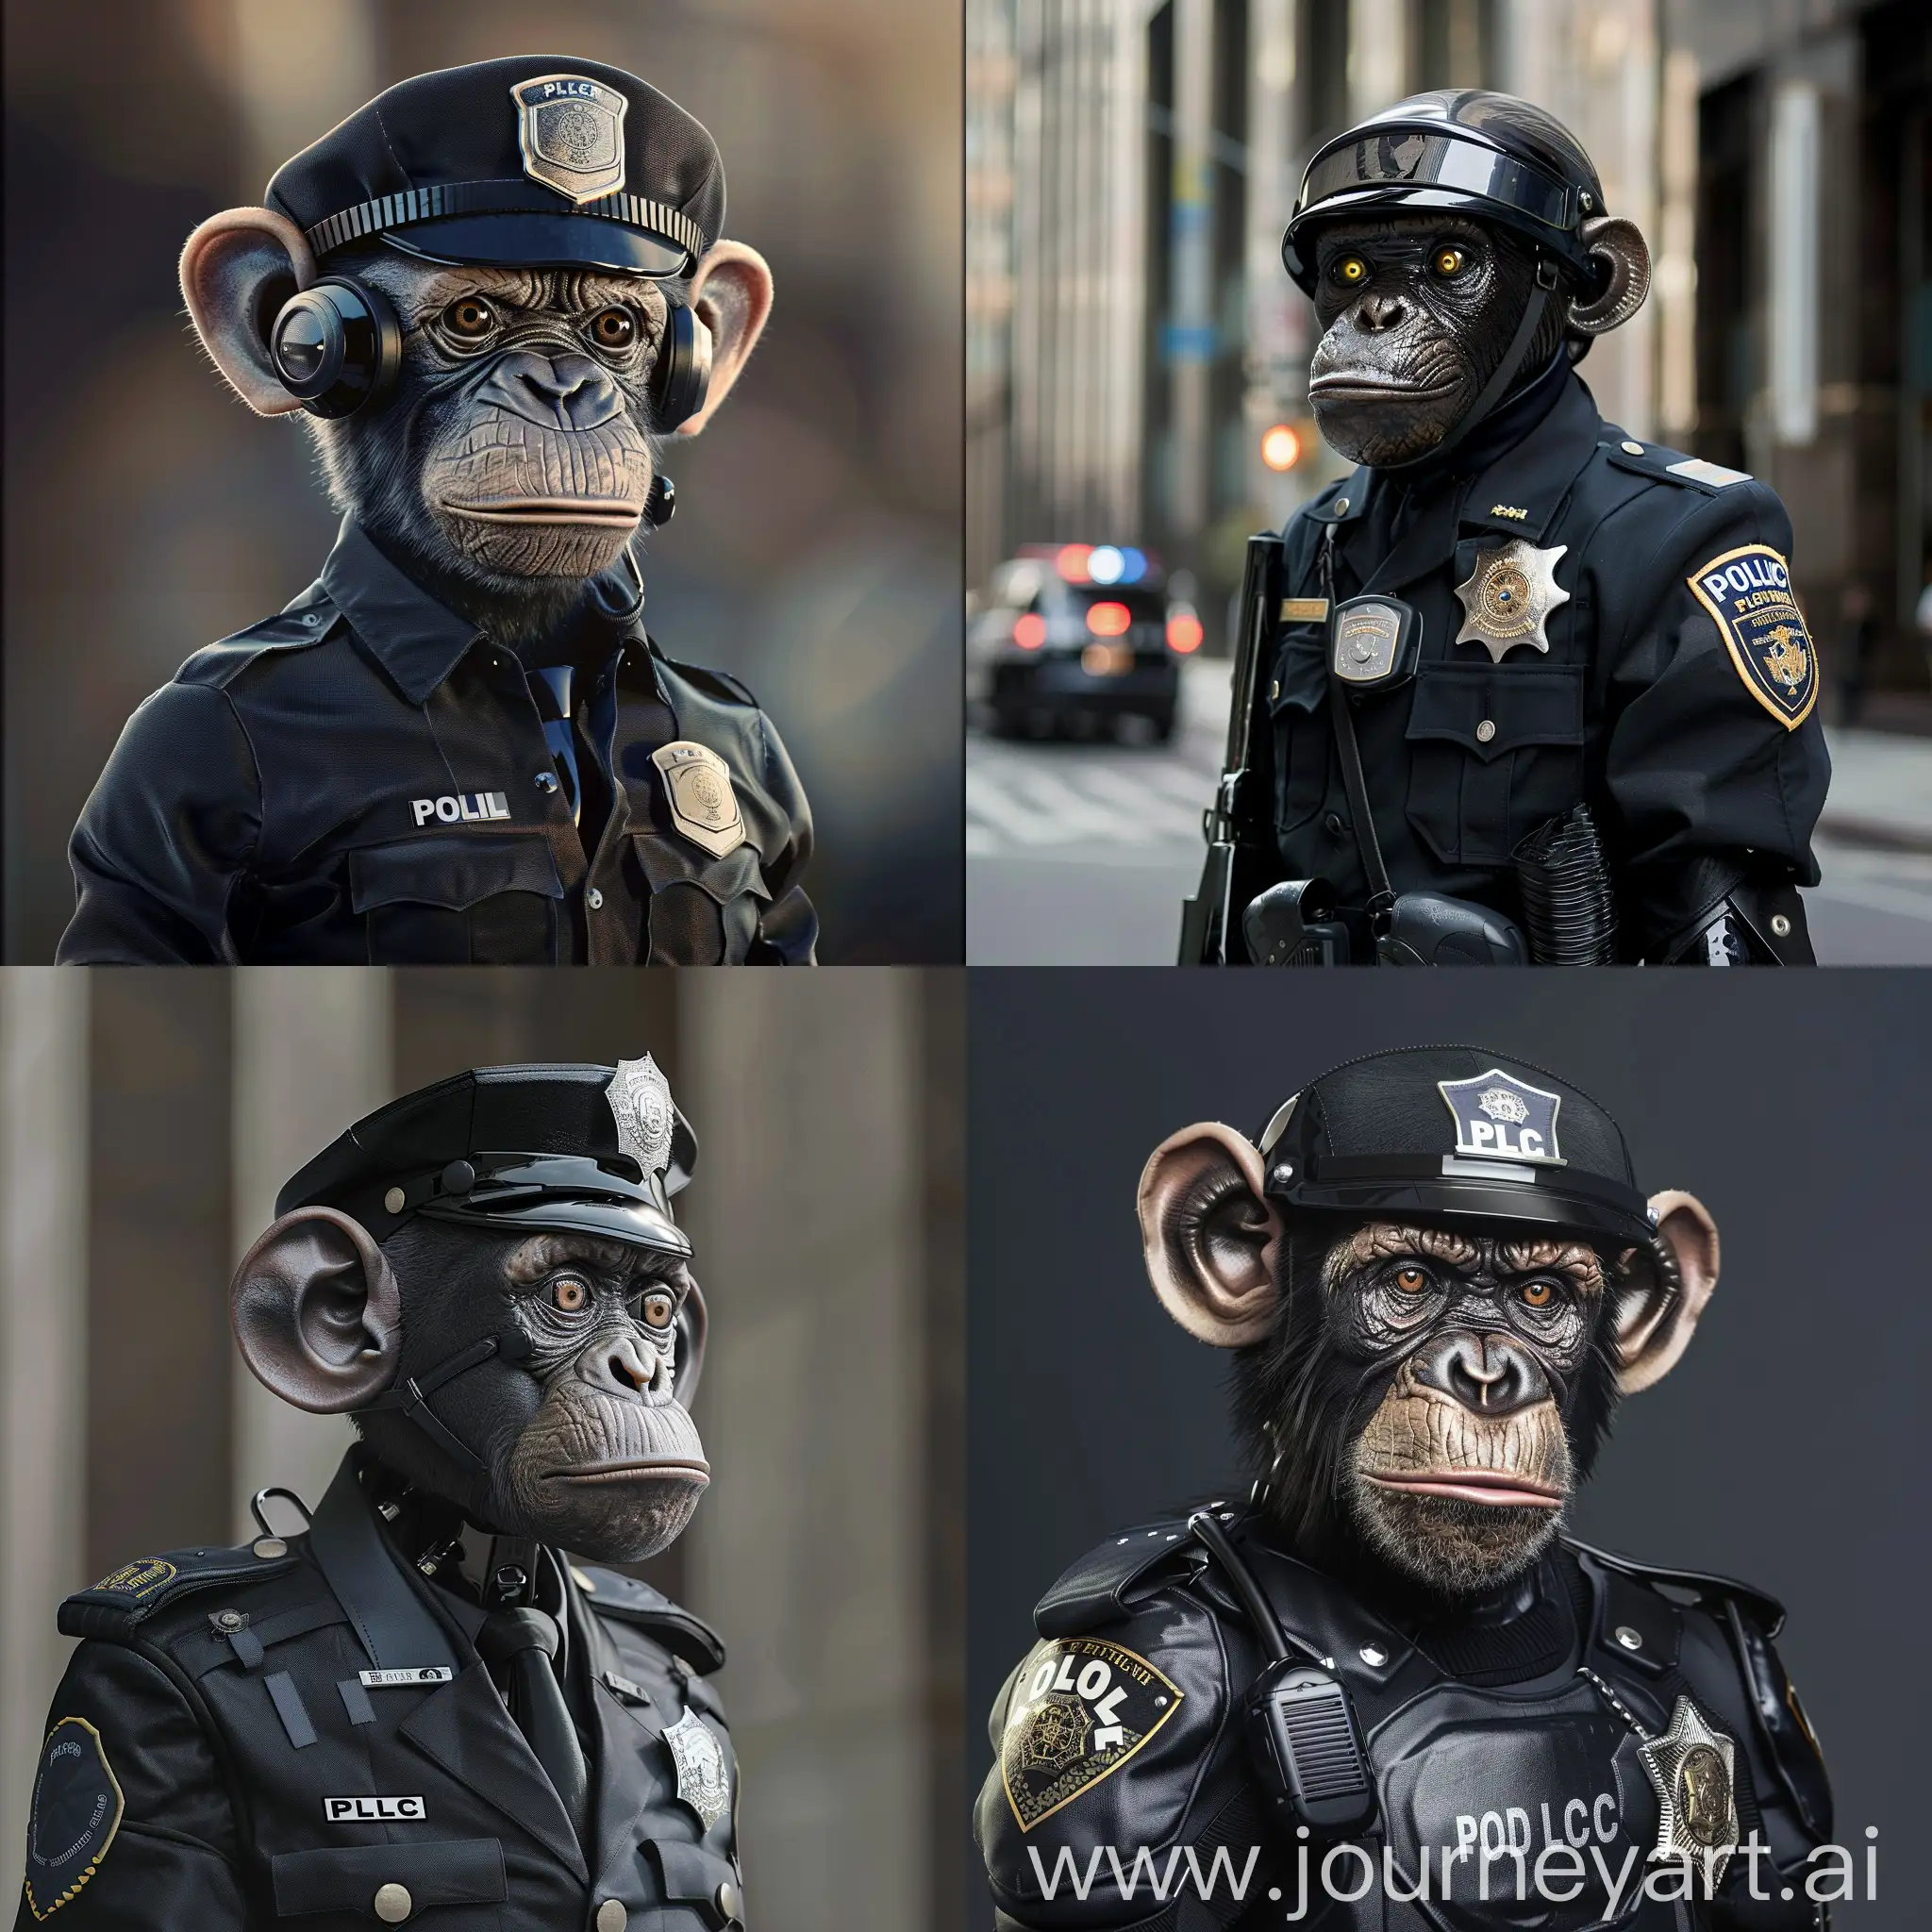 robot monkey dressed as a police officer